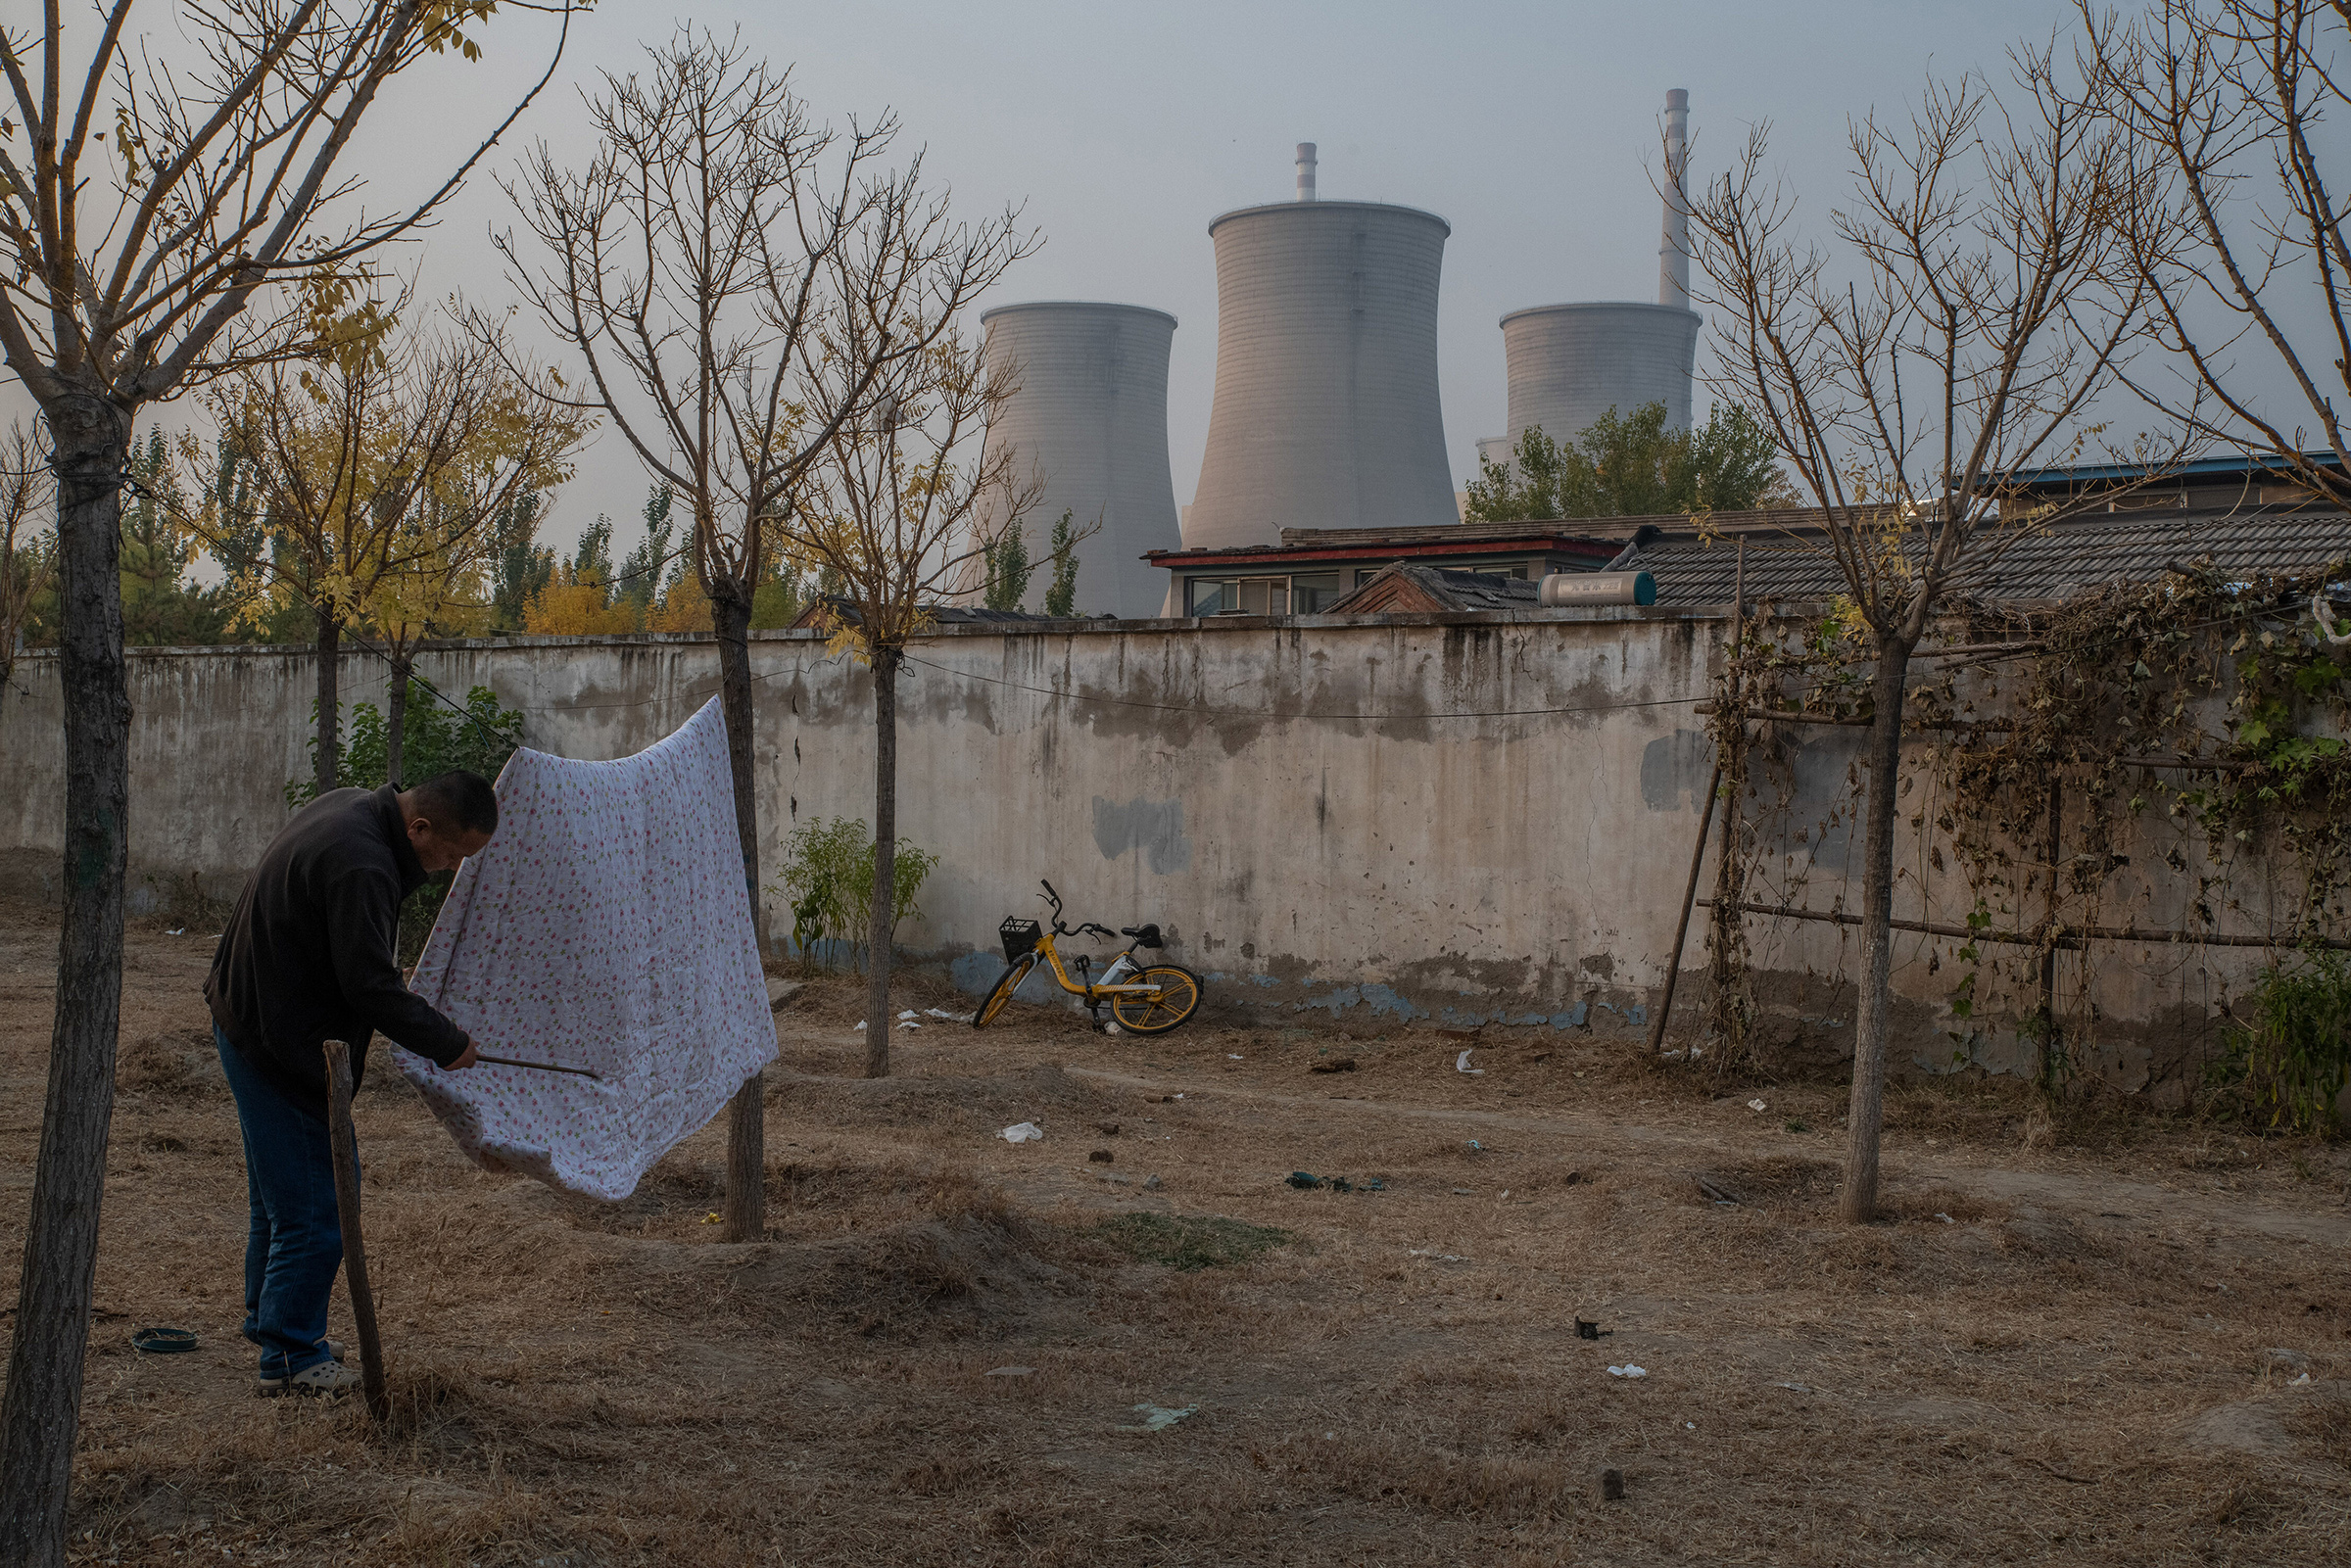 A man dusts off a comforter near a coal-fired power plant in Beijing on Oct. 25, 2022. (Gilles Sabrié—The New York Times/Redux)